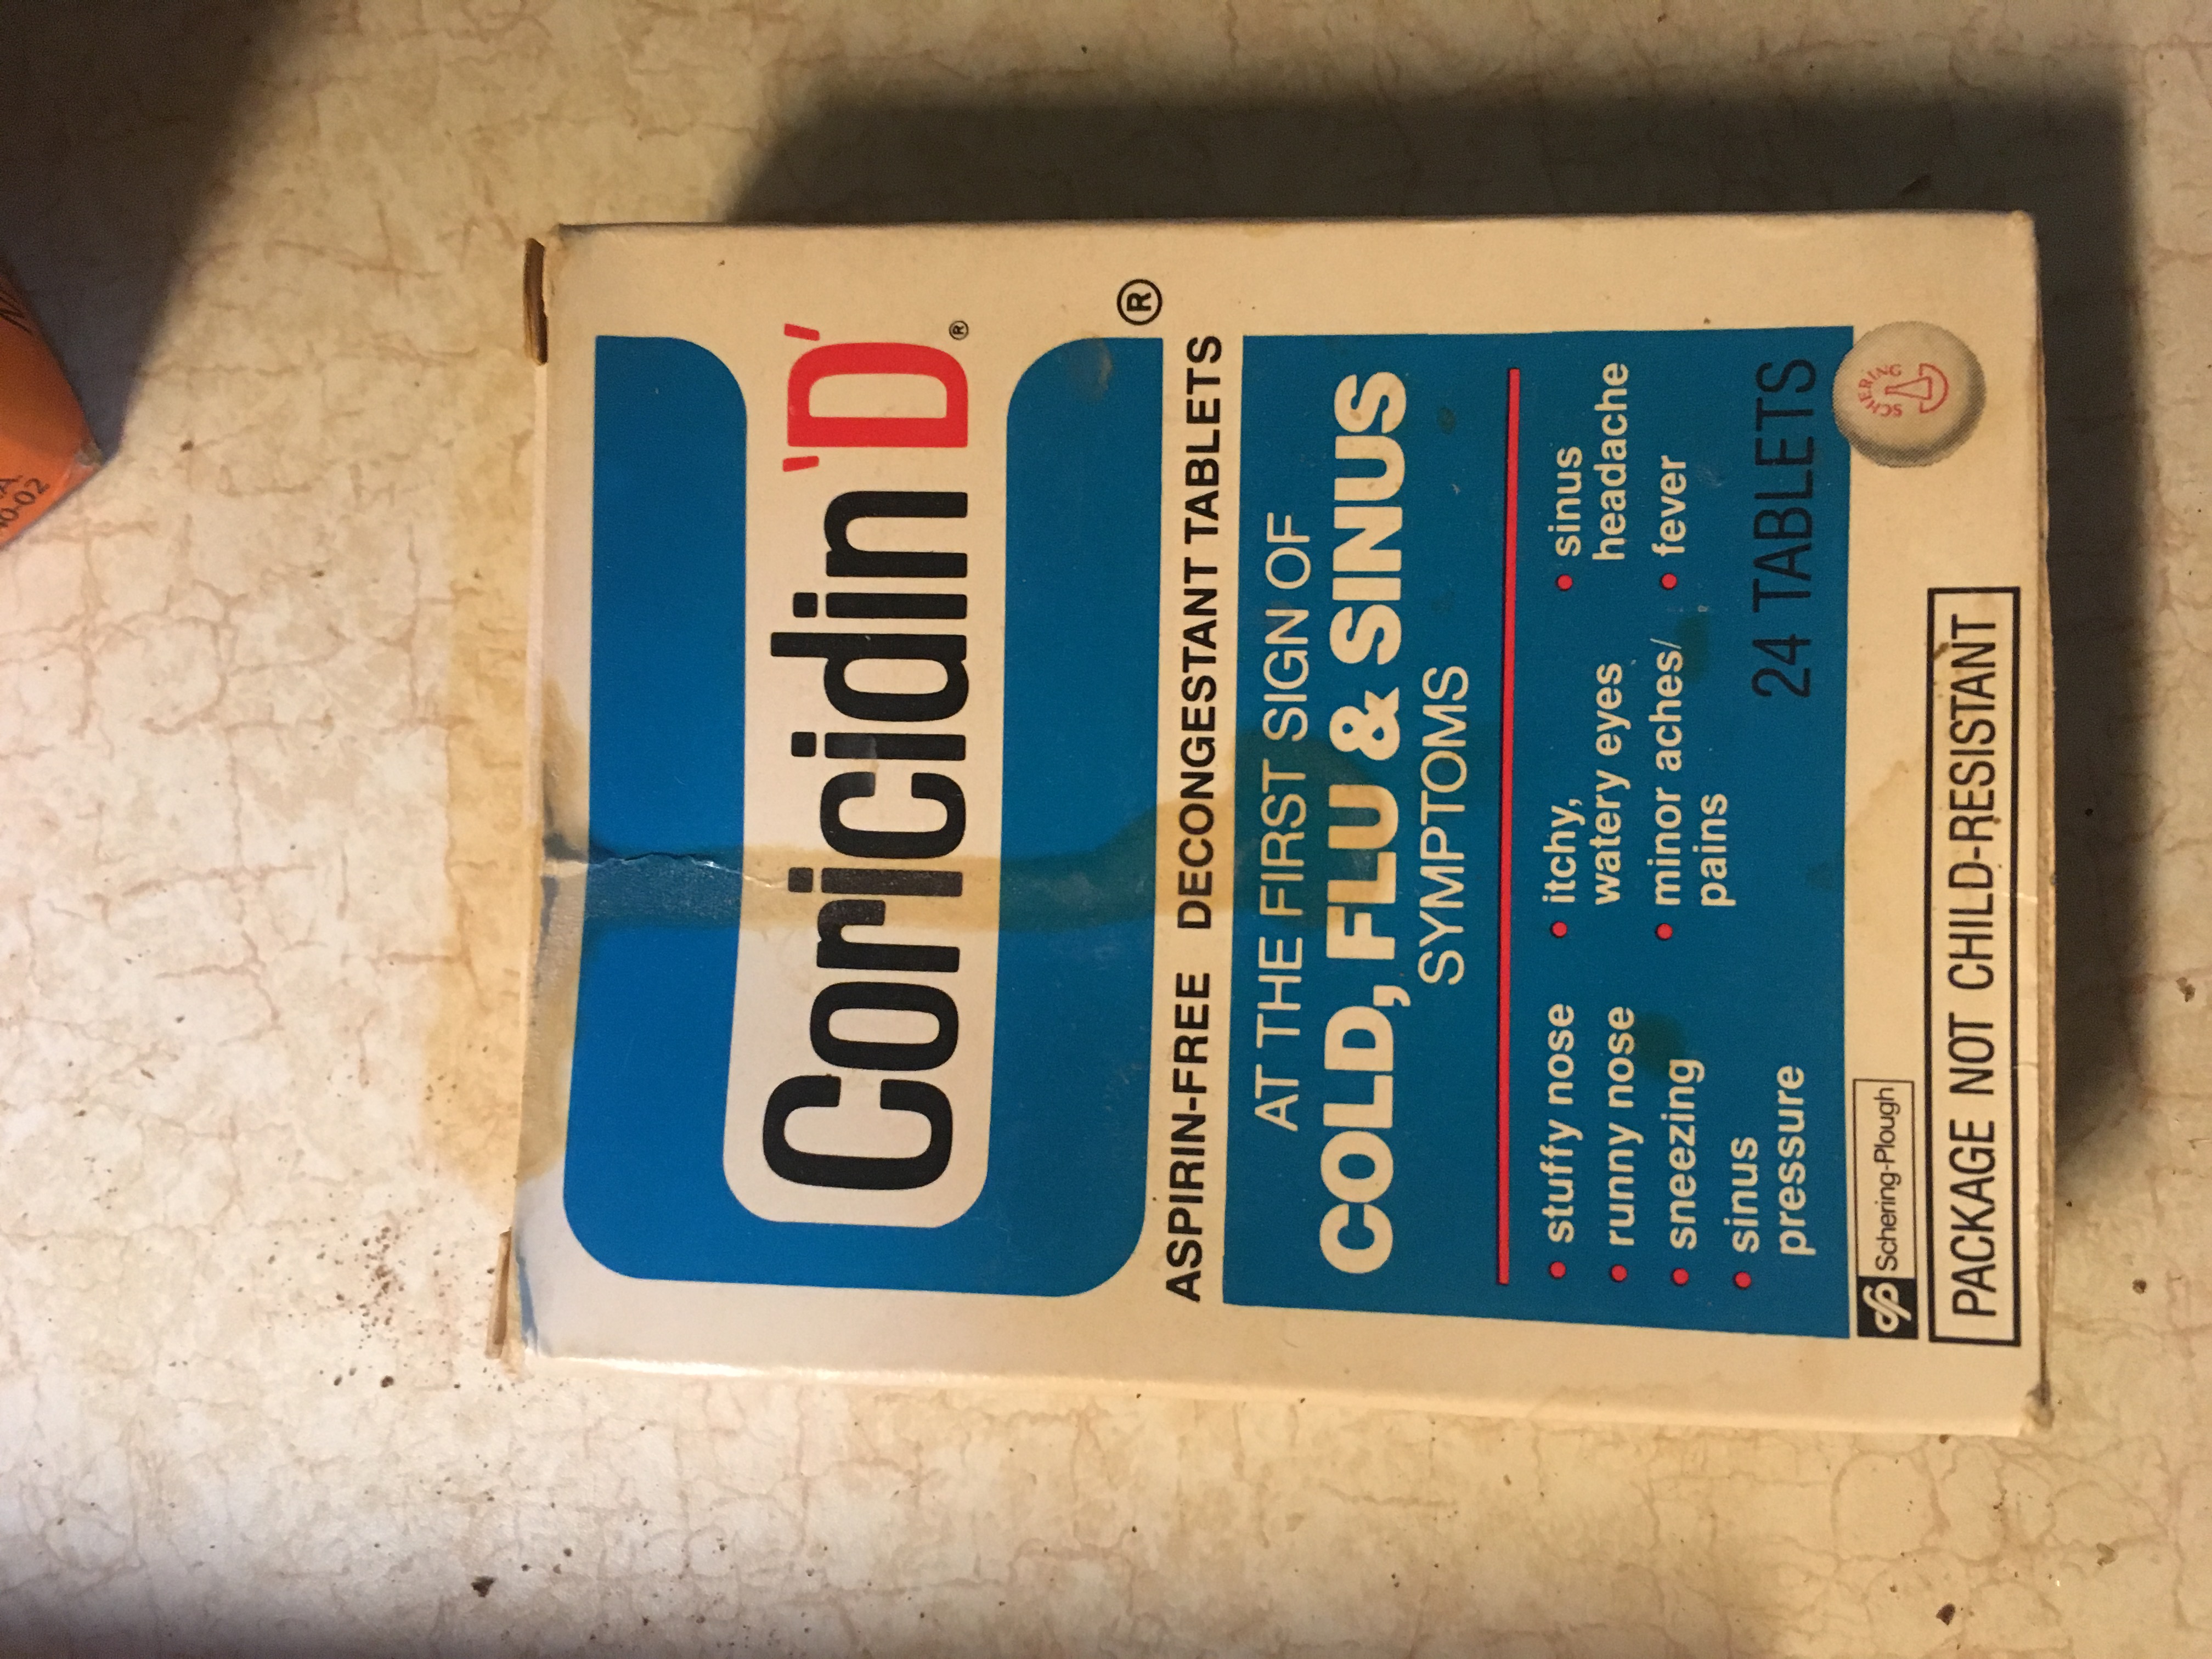 electronics - Coricidin D AspirinFree Decongestant Tablets At The First Sign Of Cold, Flu & Sinus Symptoms stuffy nose runny nose sneezing sinus pressure itchy, watery eyes minor aches pains sinus headache fever 24 Tablets 9 Schering Plough Package Not Ch